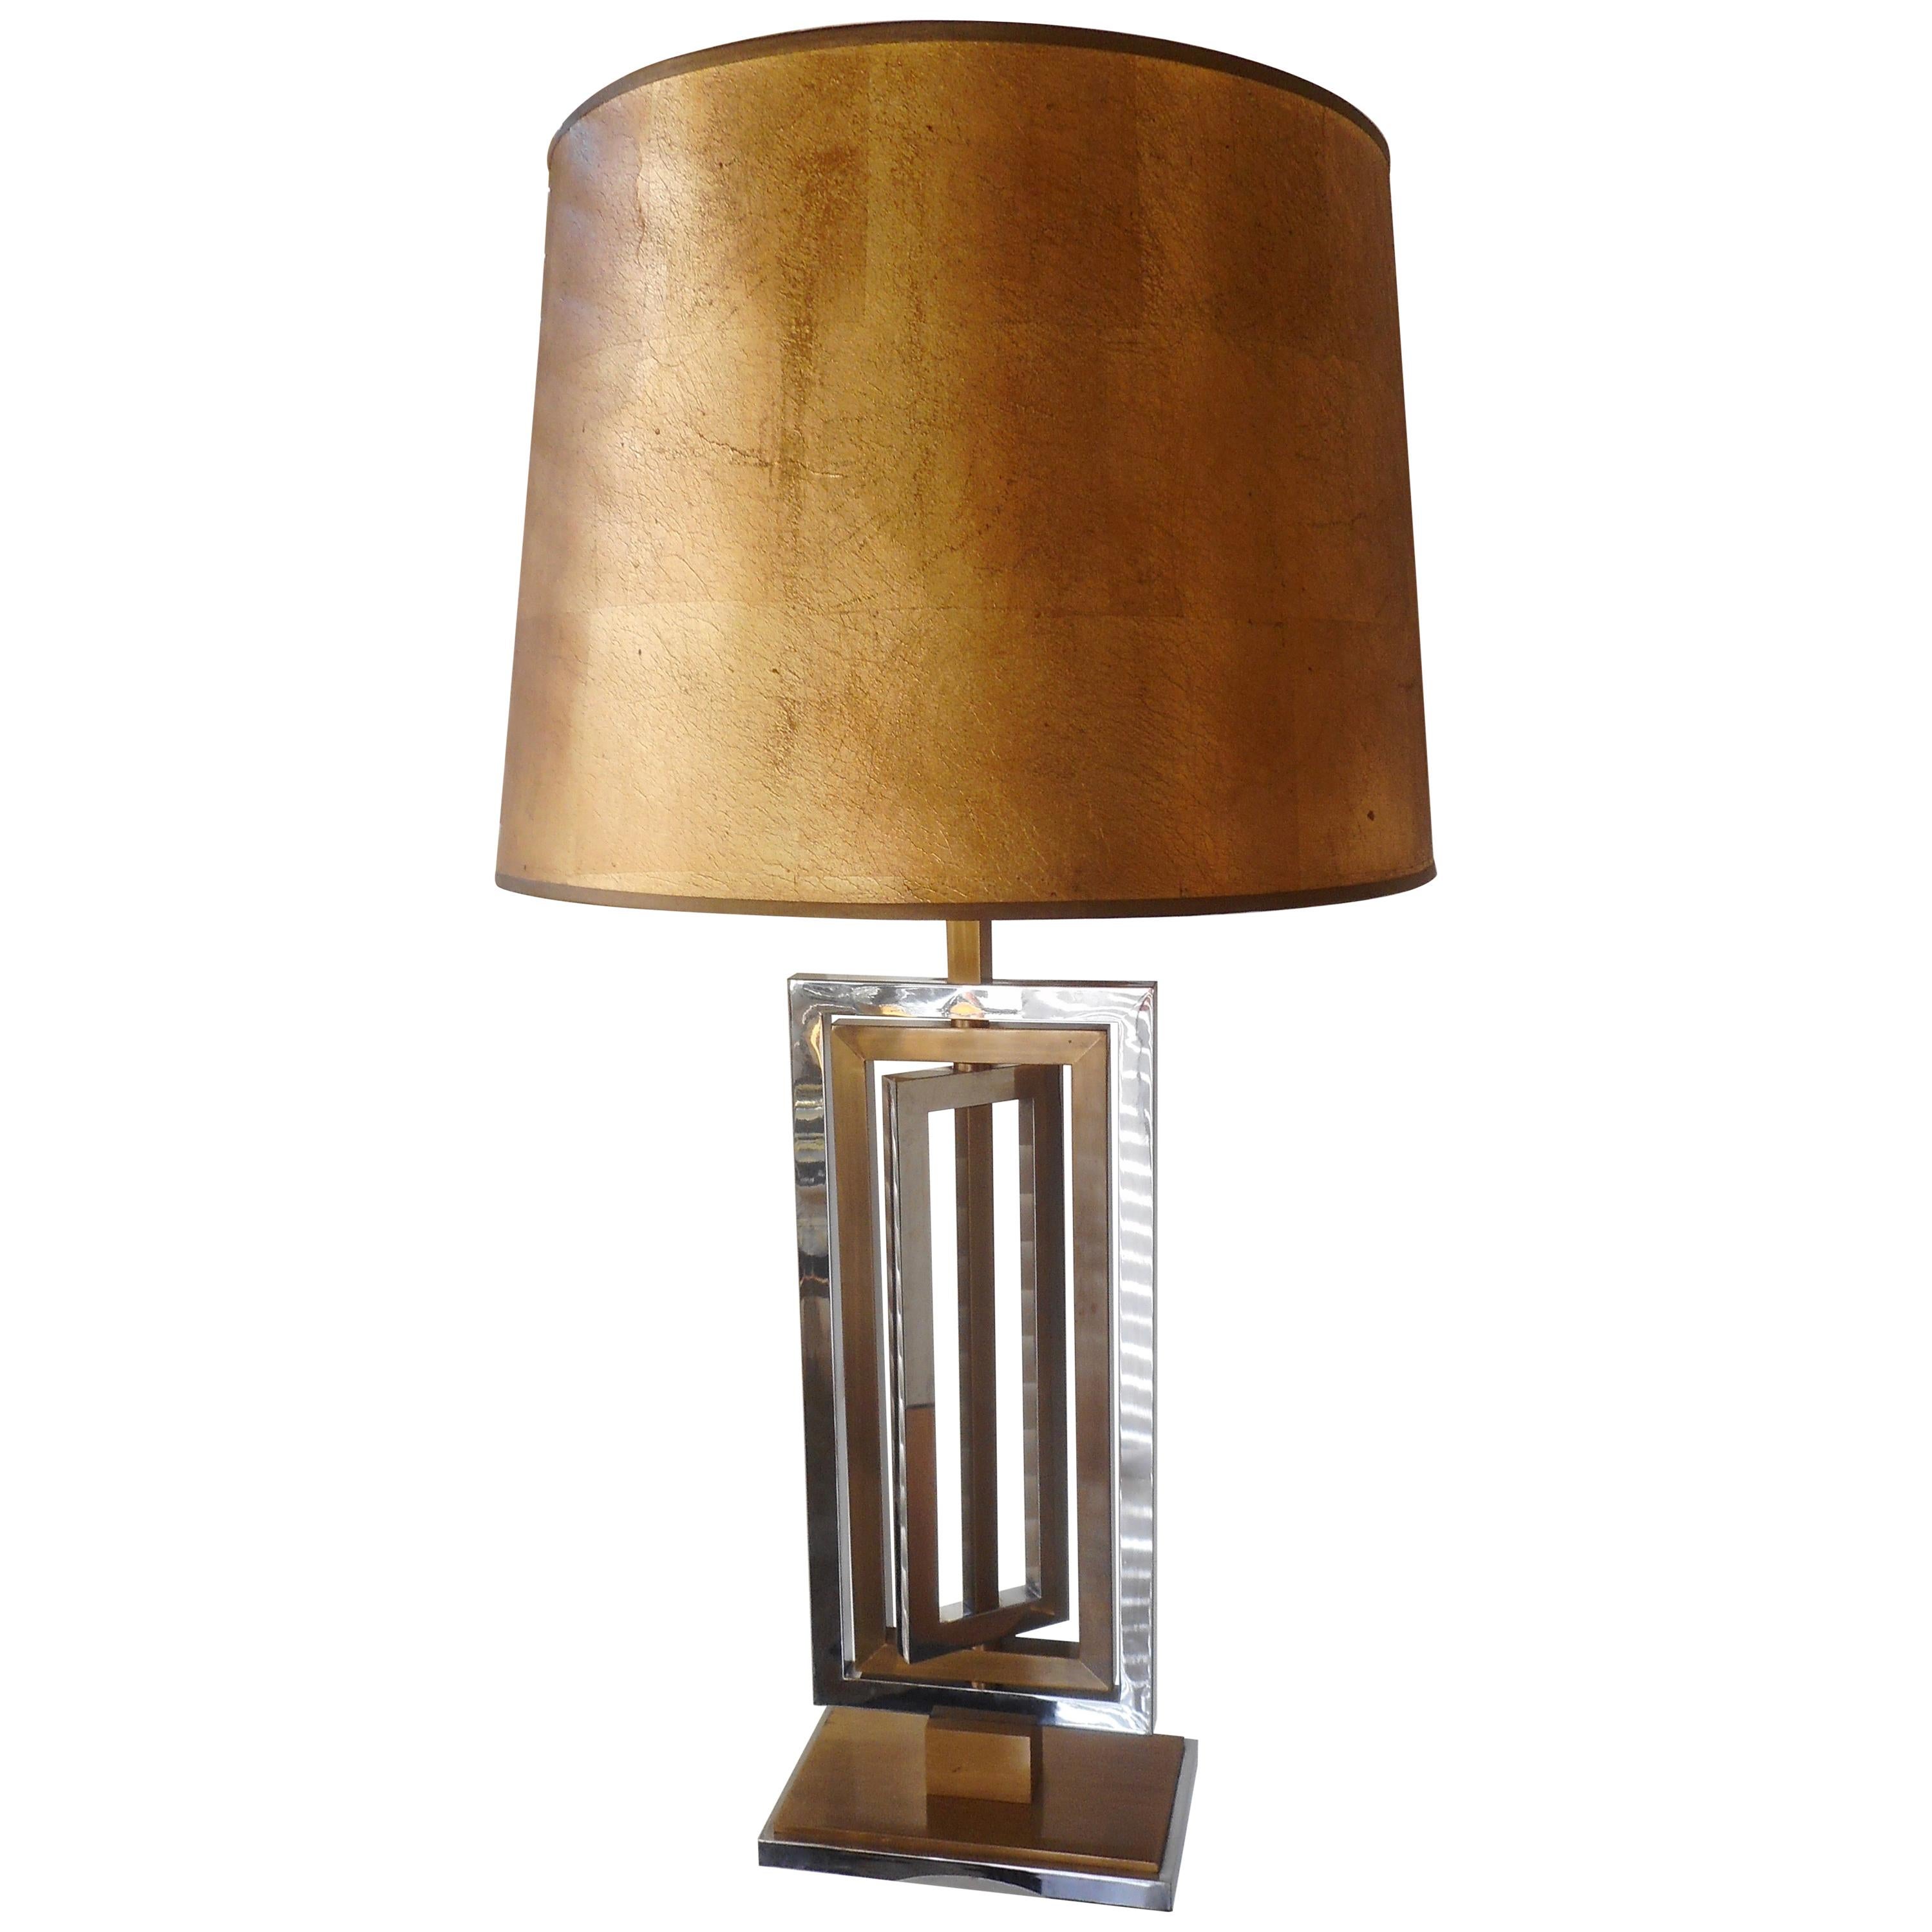 Kinetic Metal Table lamp by Maison Jansen, France, 1970